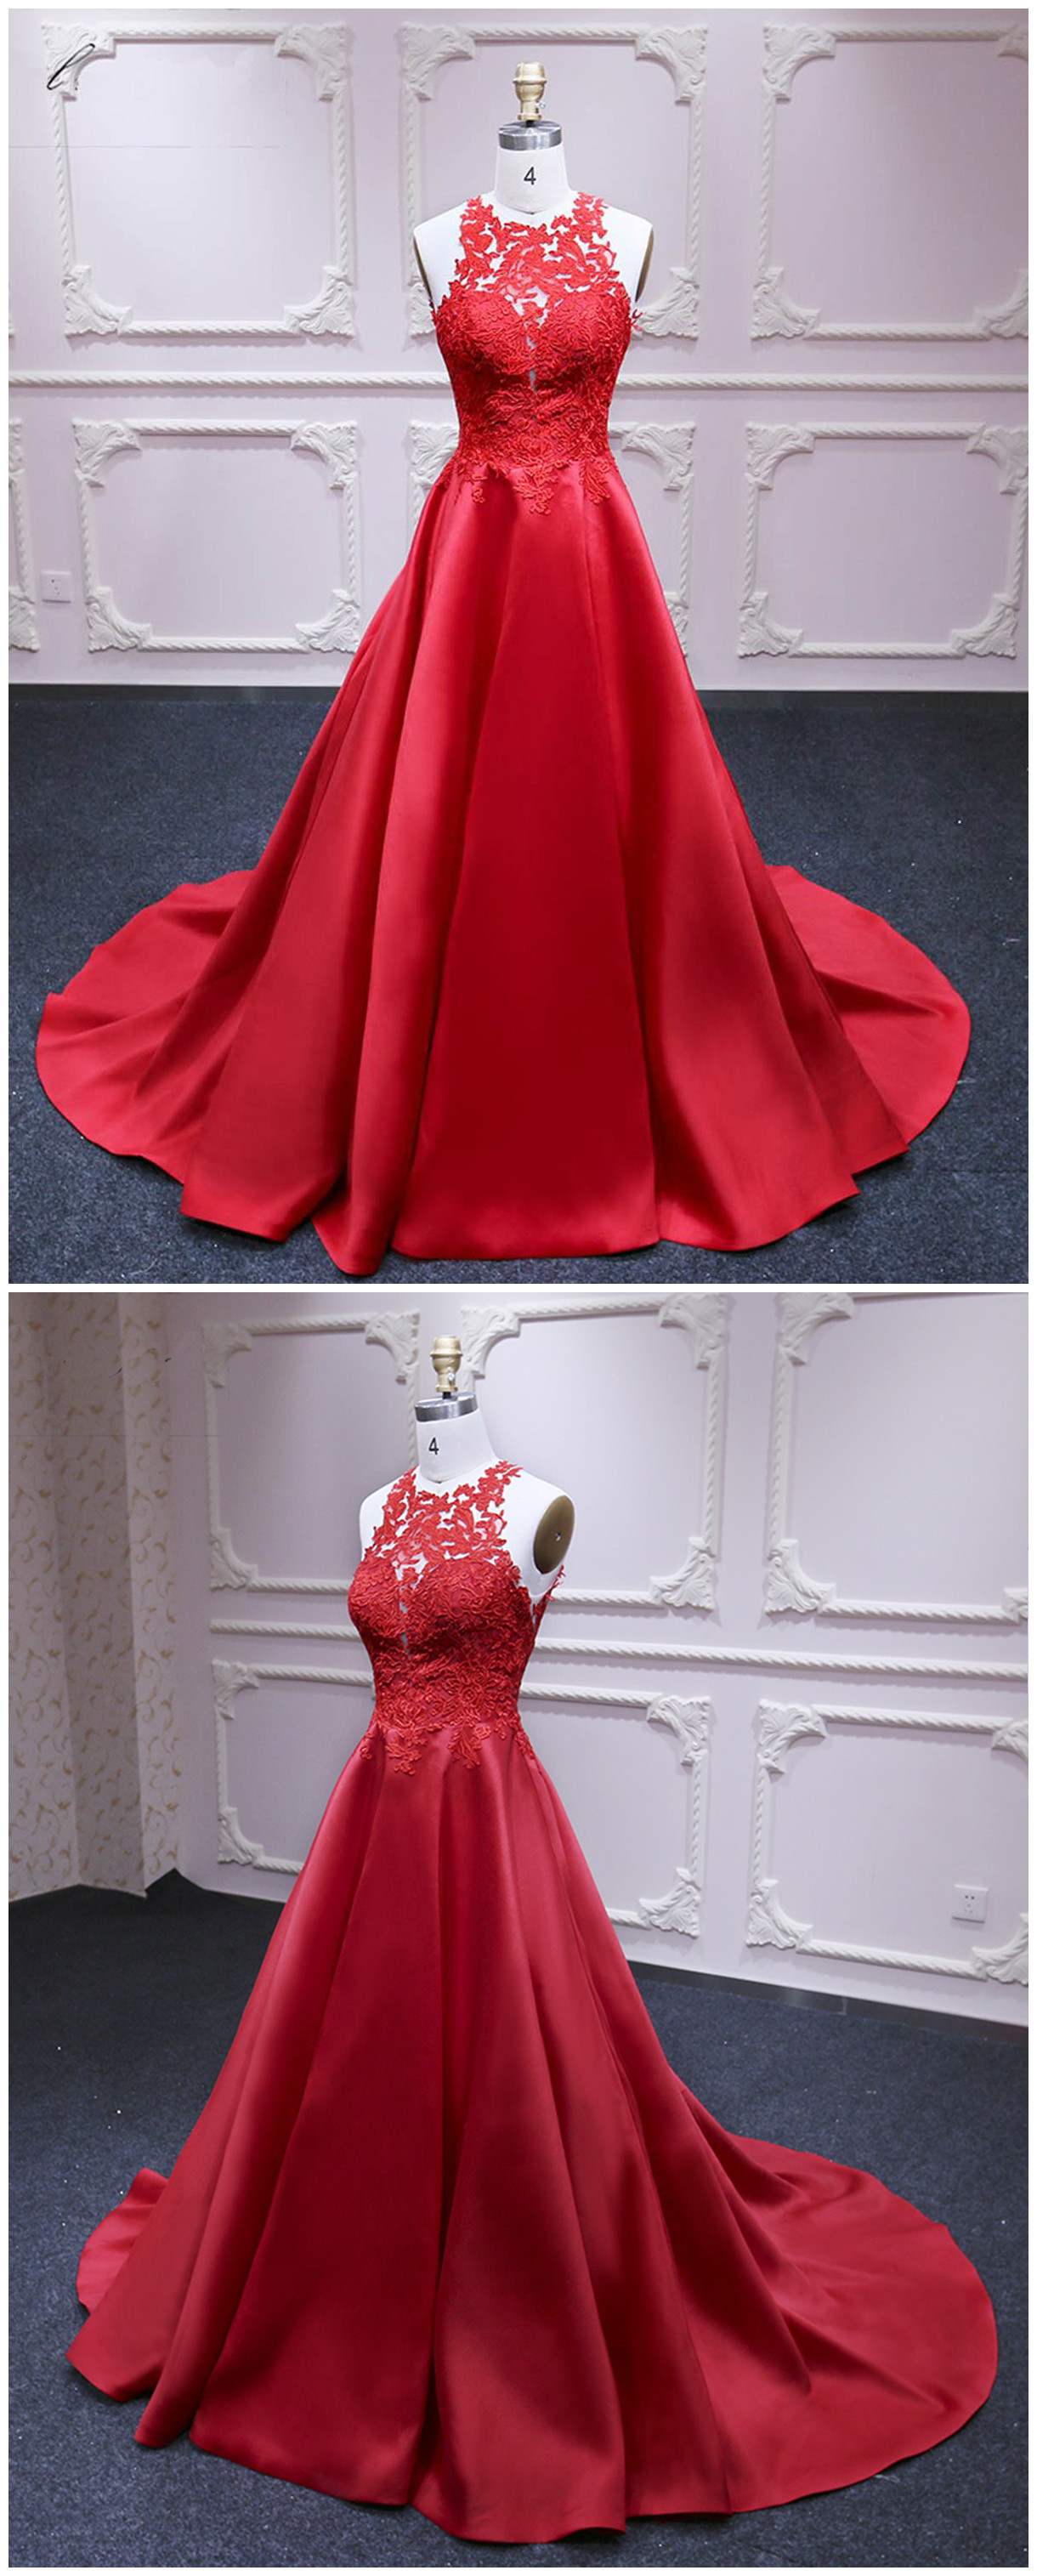 Red Satin Strapless Long Customize Formal Prom Dress With Lace Appliqué